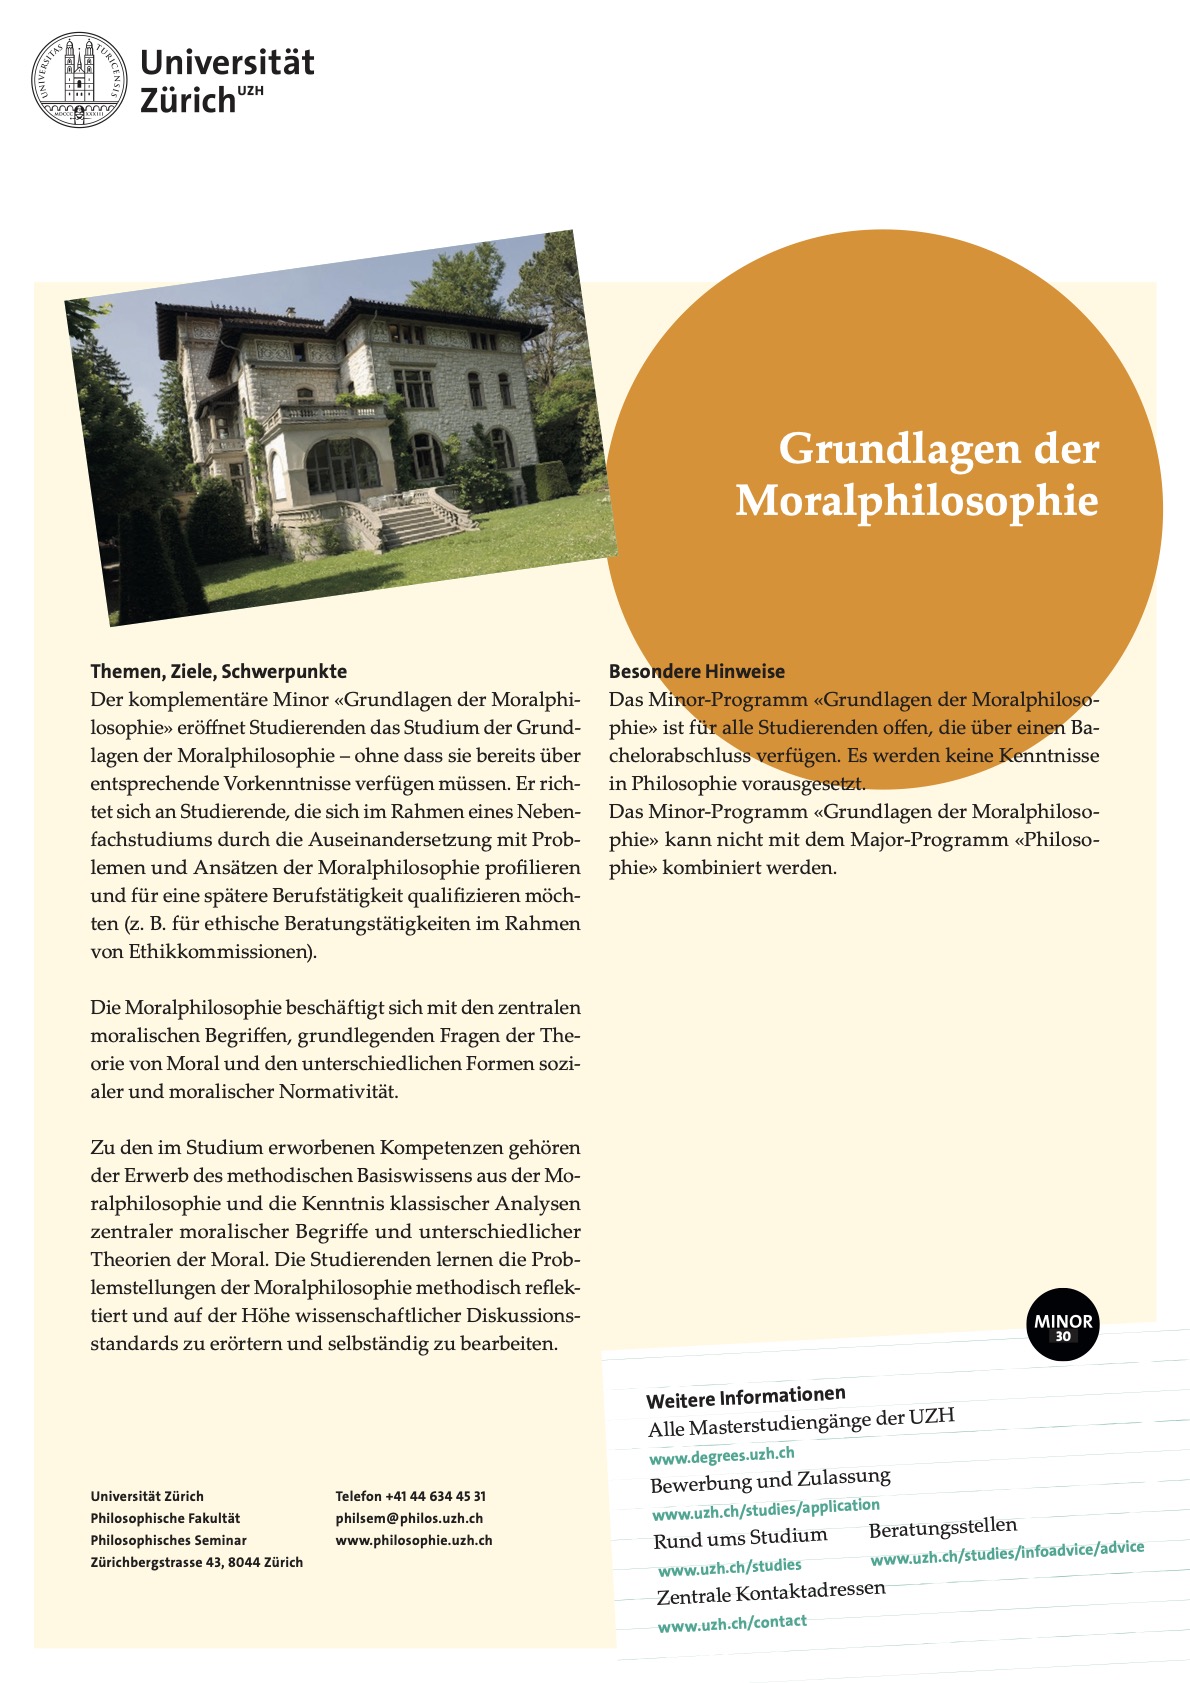 Flyer for prospective students for the Minor in the Foundations of Moral Philosophy (German only)